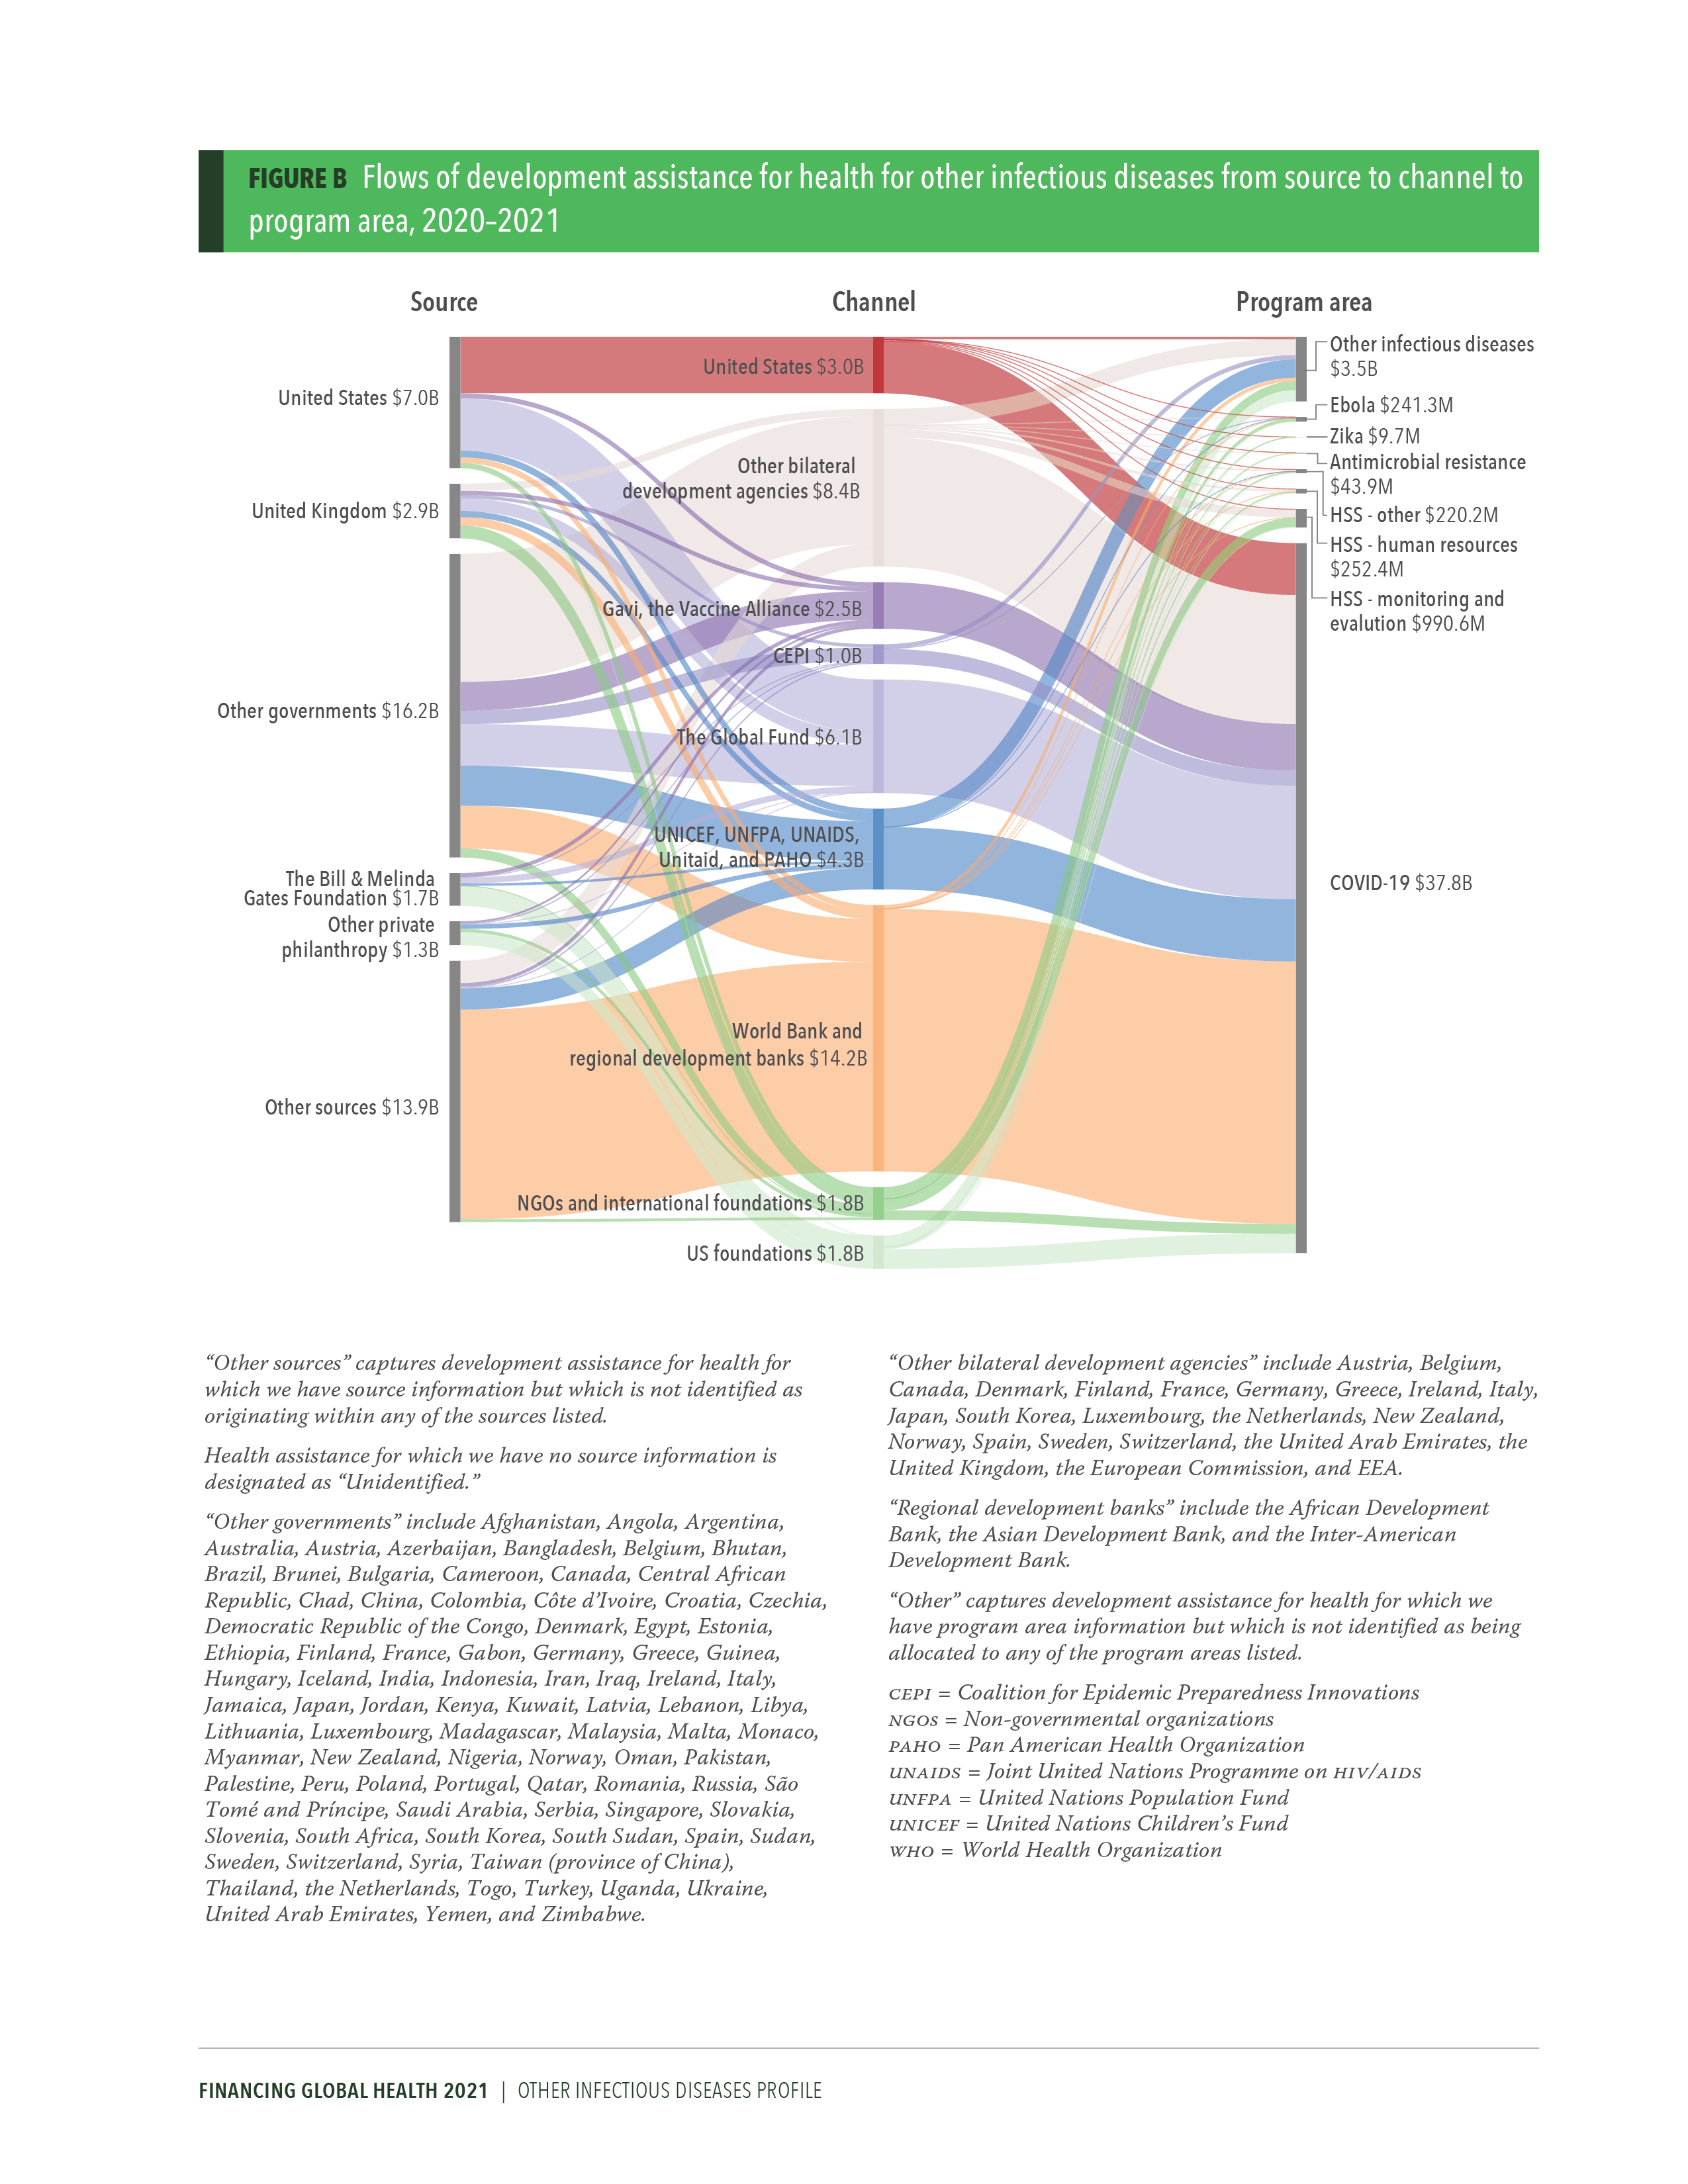 Disease spending profile for other infectious diseases: page 2 shows a diagram of flows of development assistance for health from source to channel to program area. Download the profile for more details. 